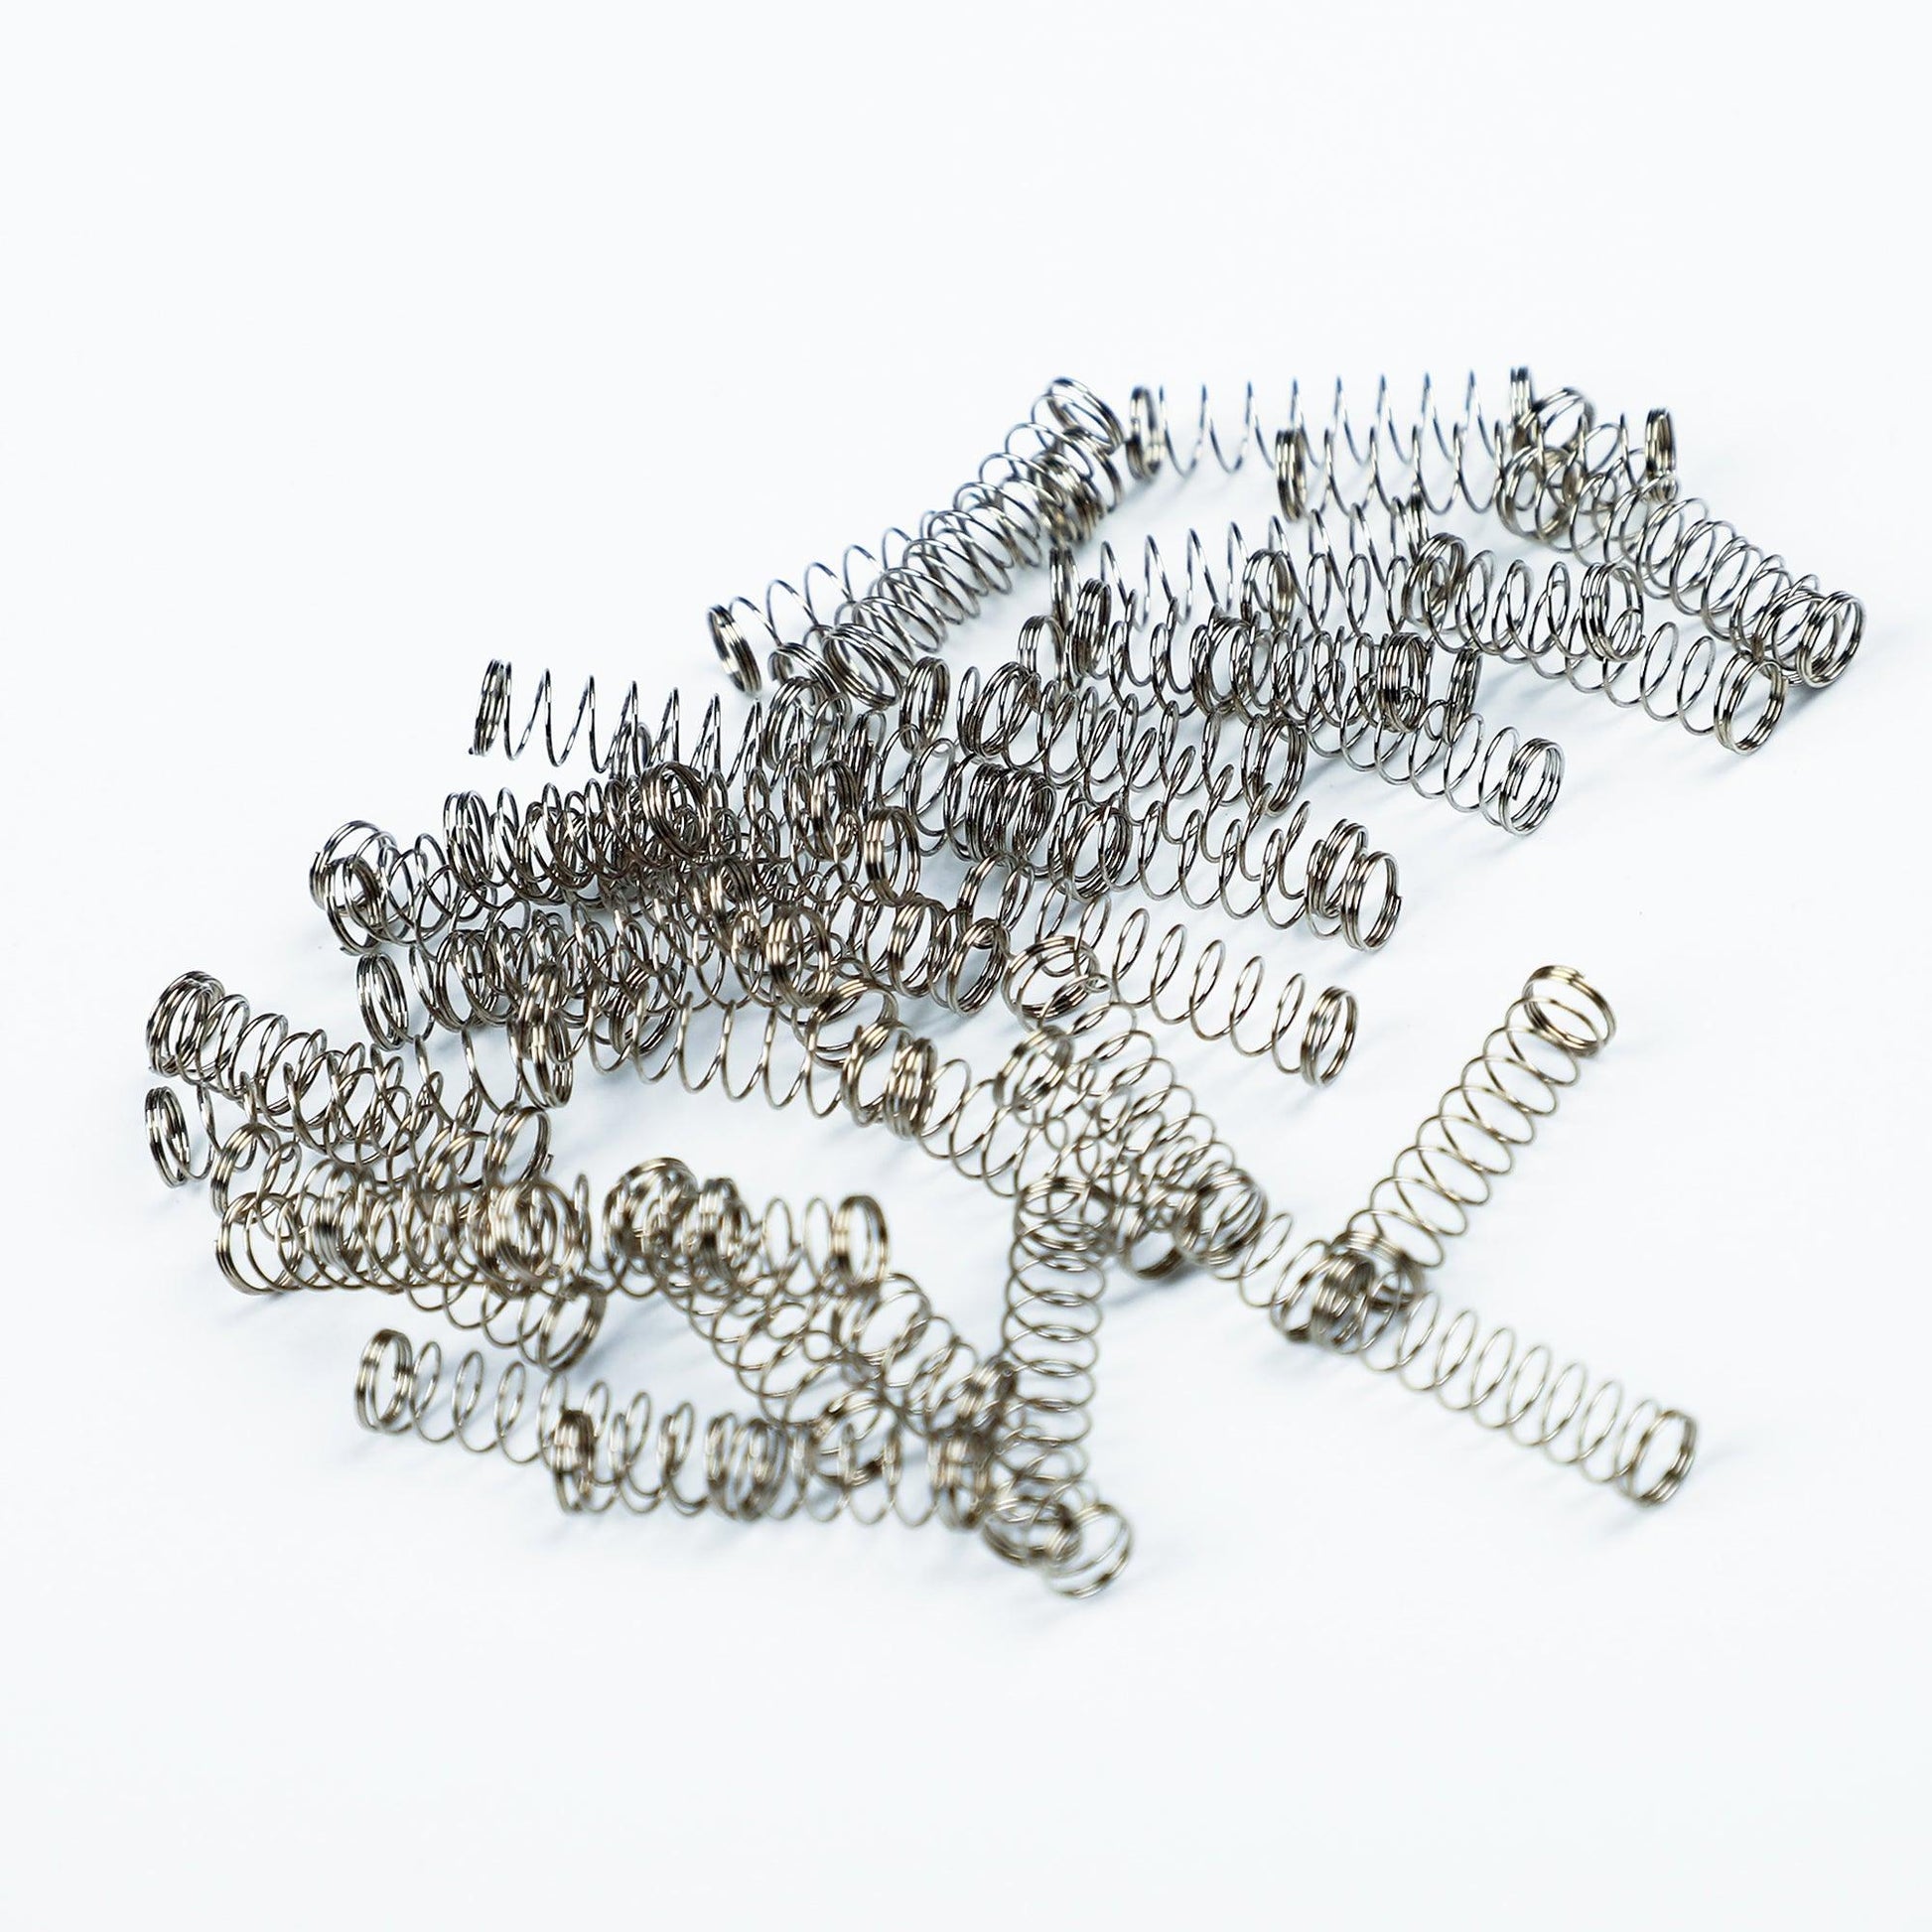 110pcs\lot 24k Gold-plated And Stainless Steel Custom Springs For switches Replacement - IPOPULARSHOP